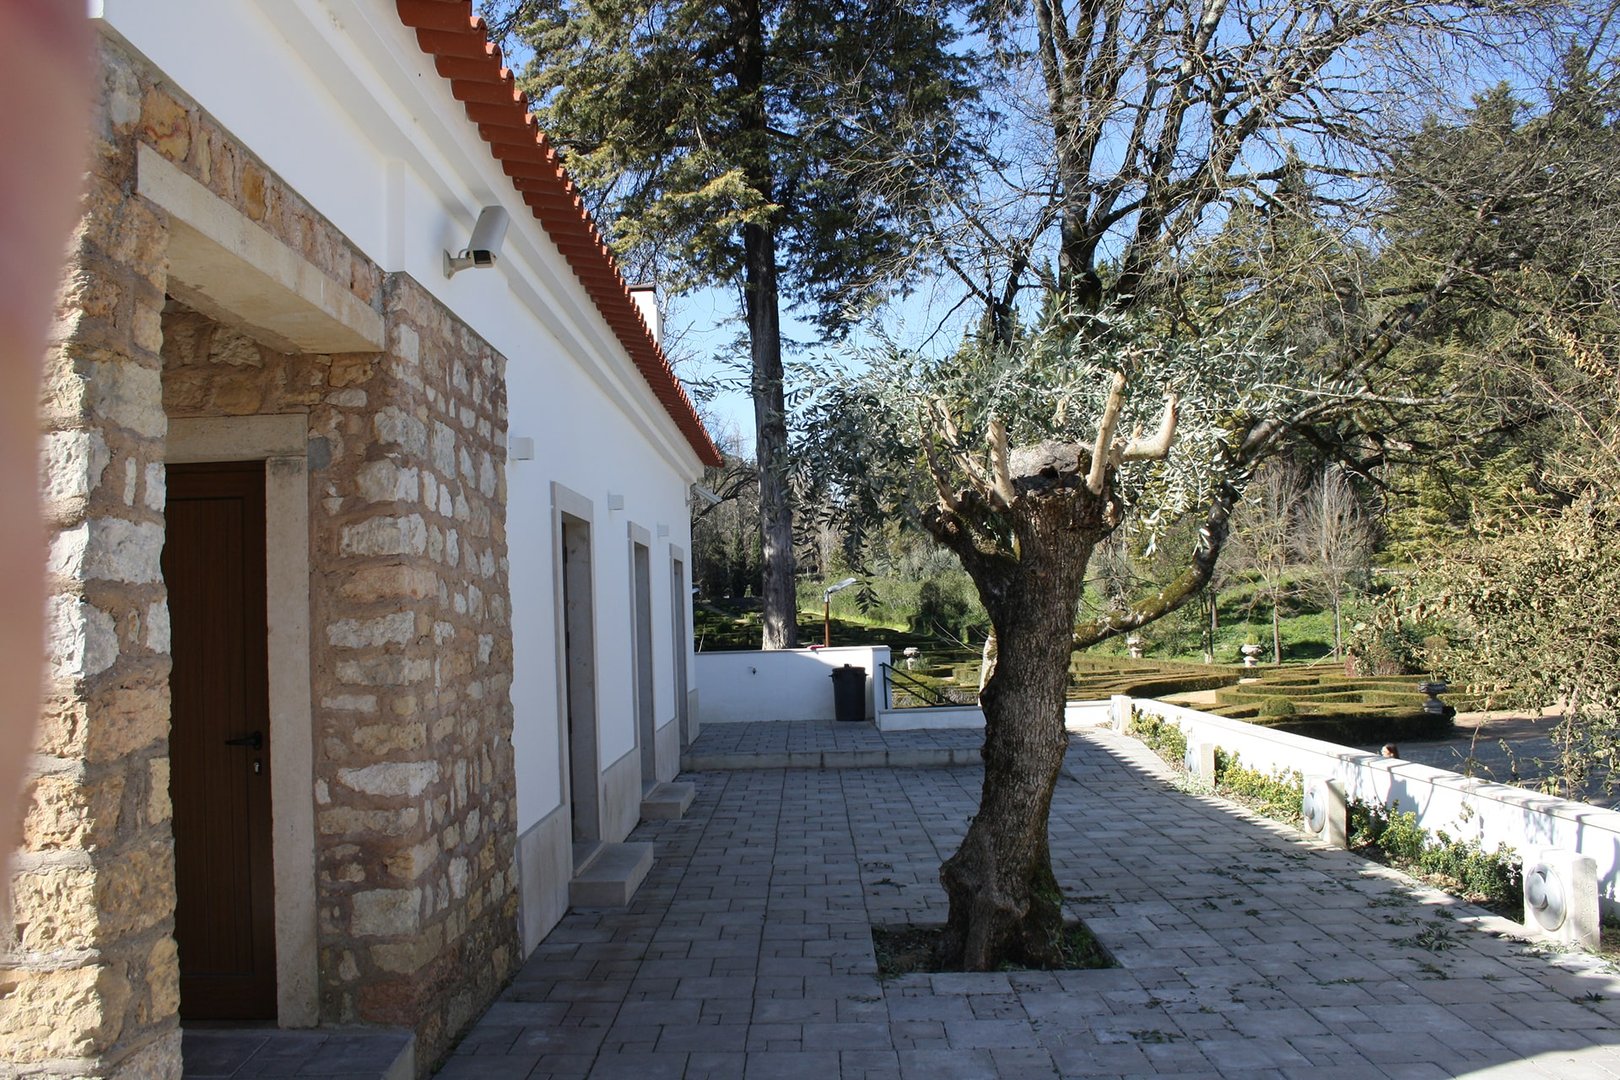 Environmental Awareness and Interpretation Centre of Tomar - Located in Forest of Sete Montes, the Environmental Awareness and Interpretation Centre is a recreational-educational space